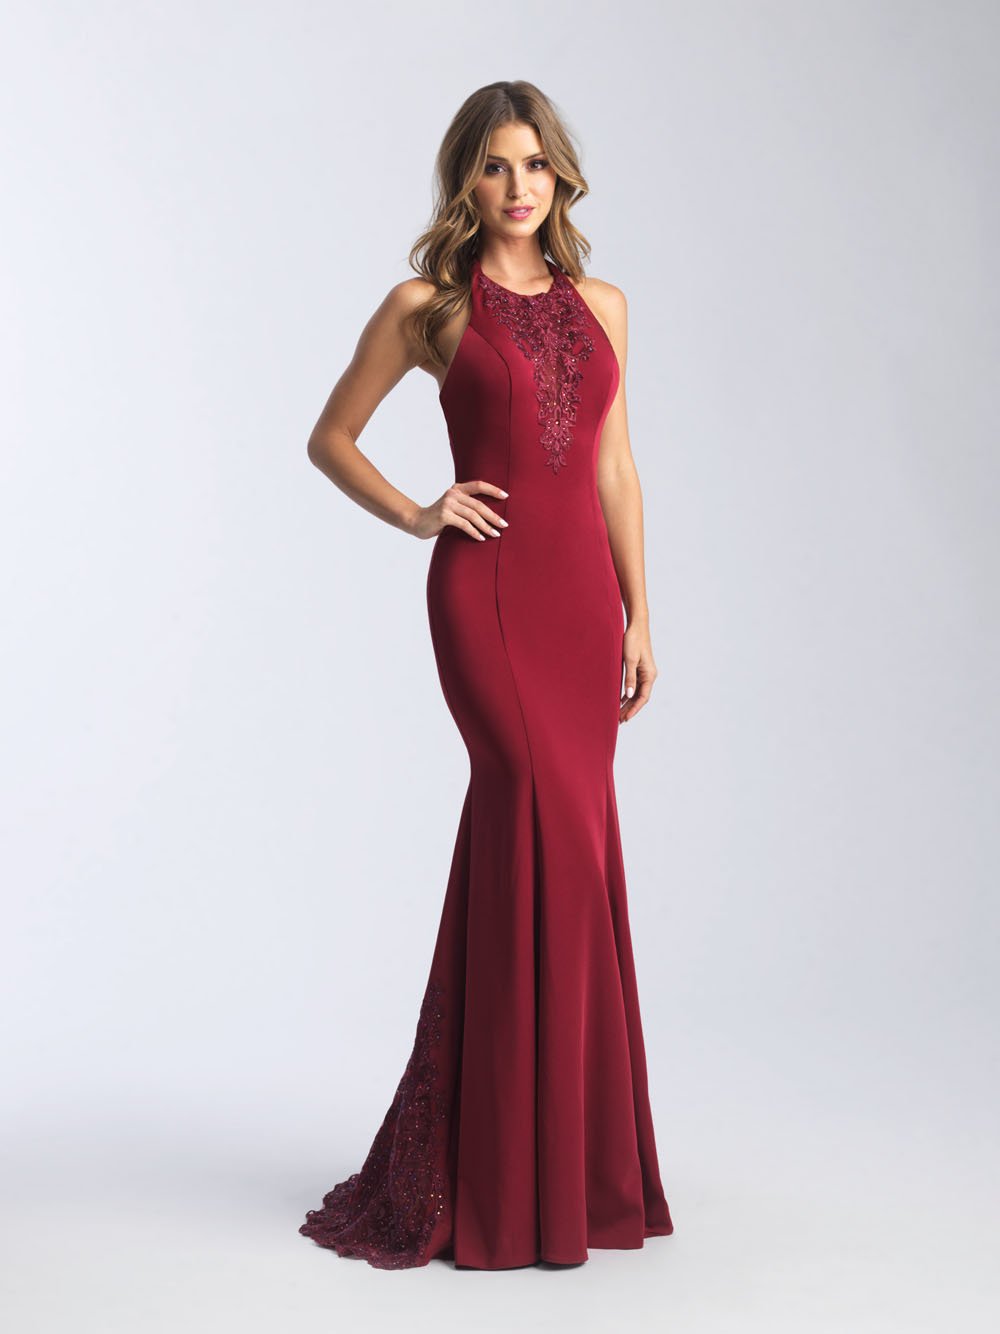 Madison James 20-375 dress images in these colors: Black, Burgundy.